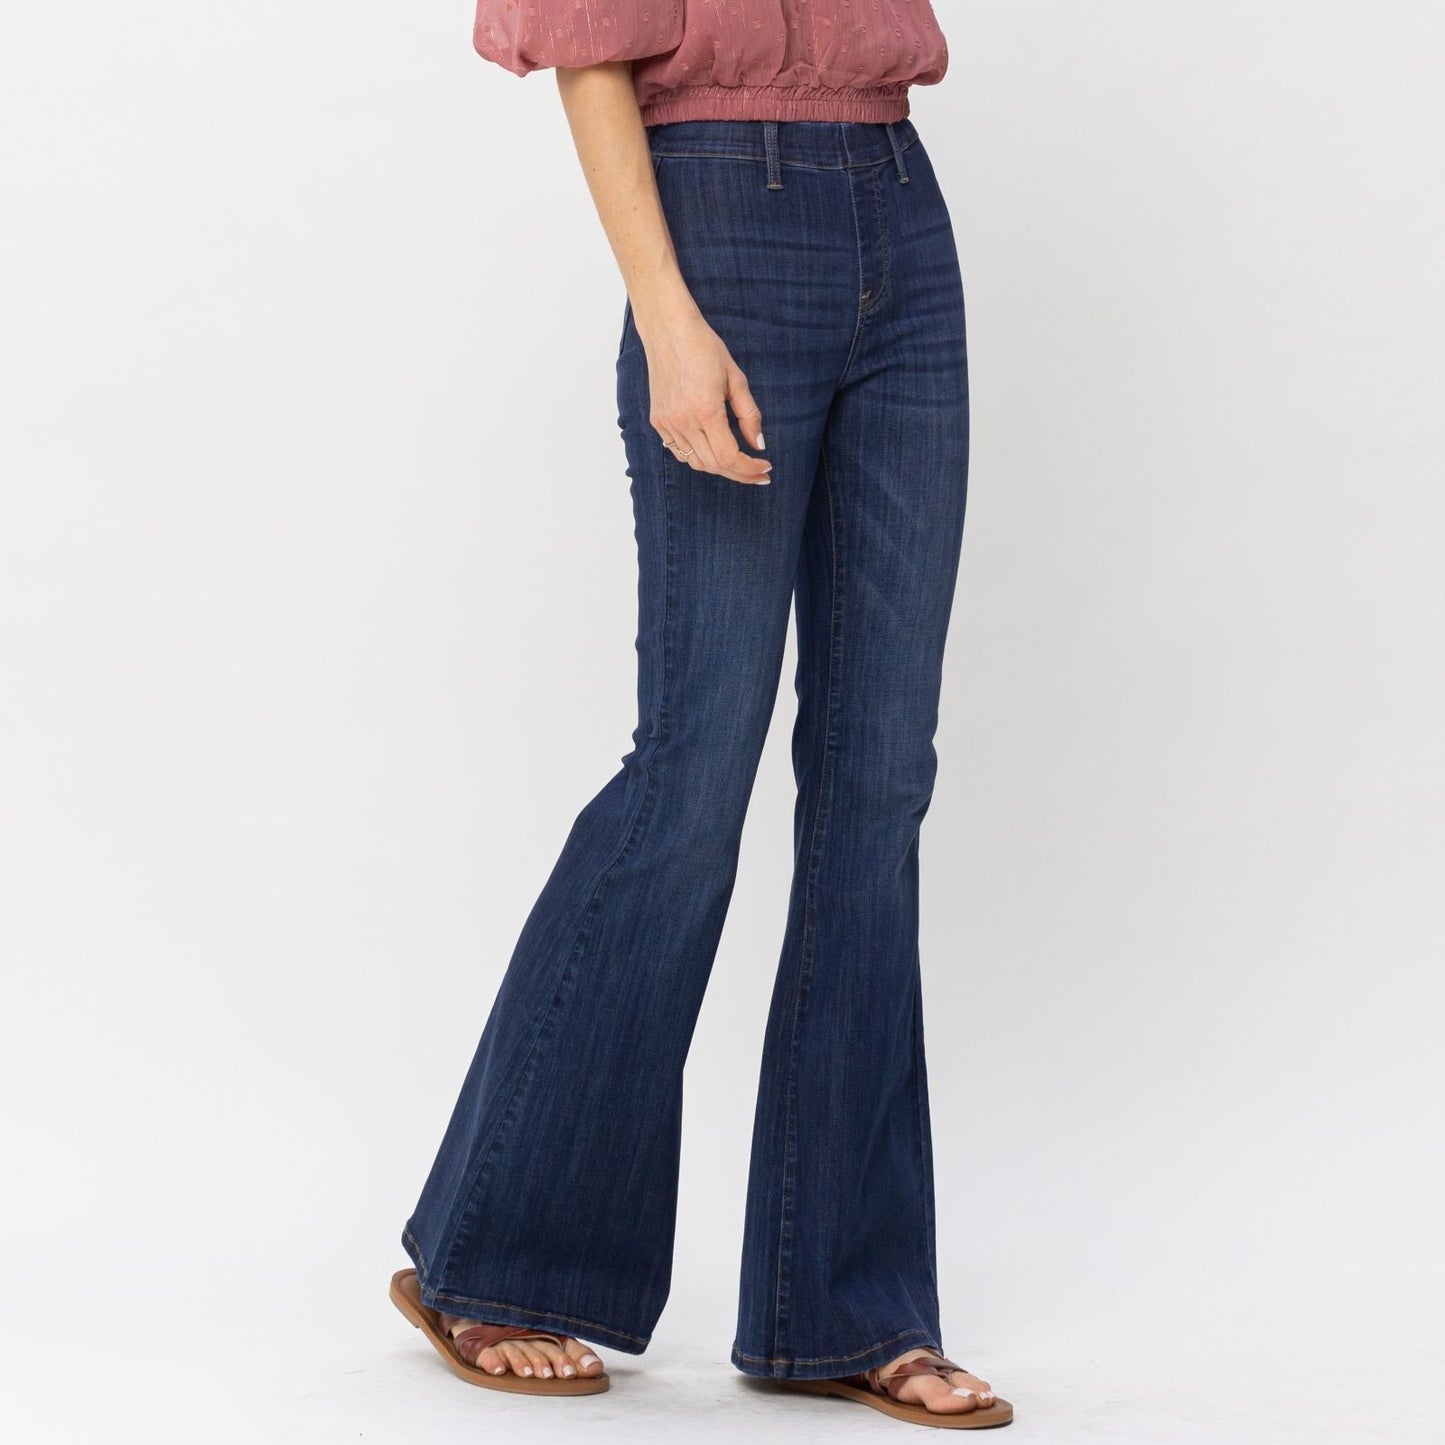 Judy Blue Pull On Flare Jeans